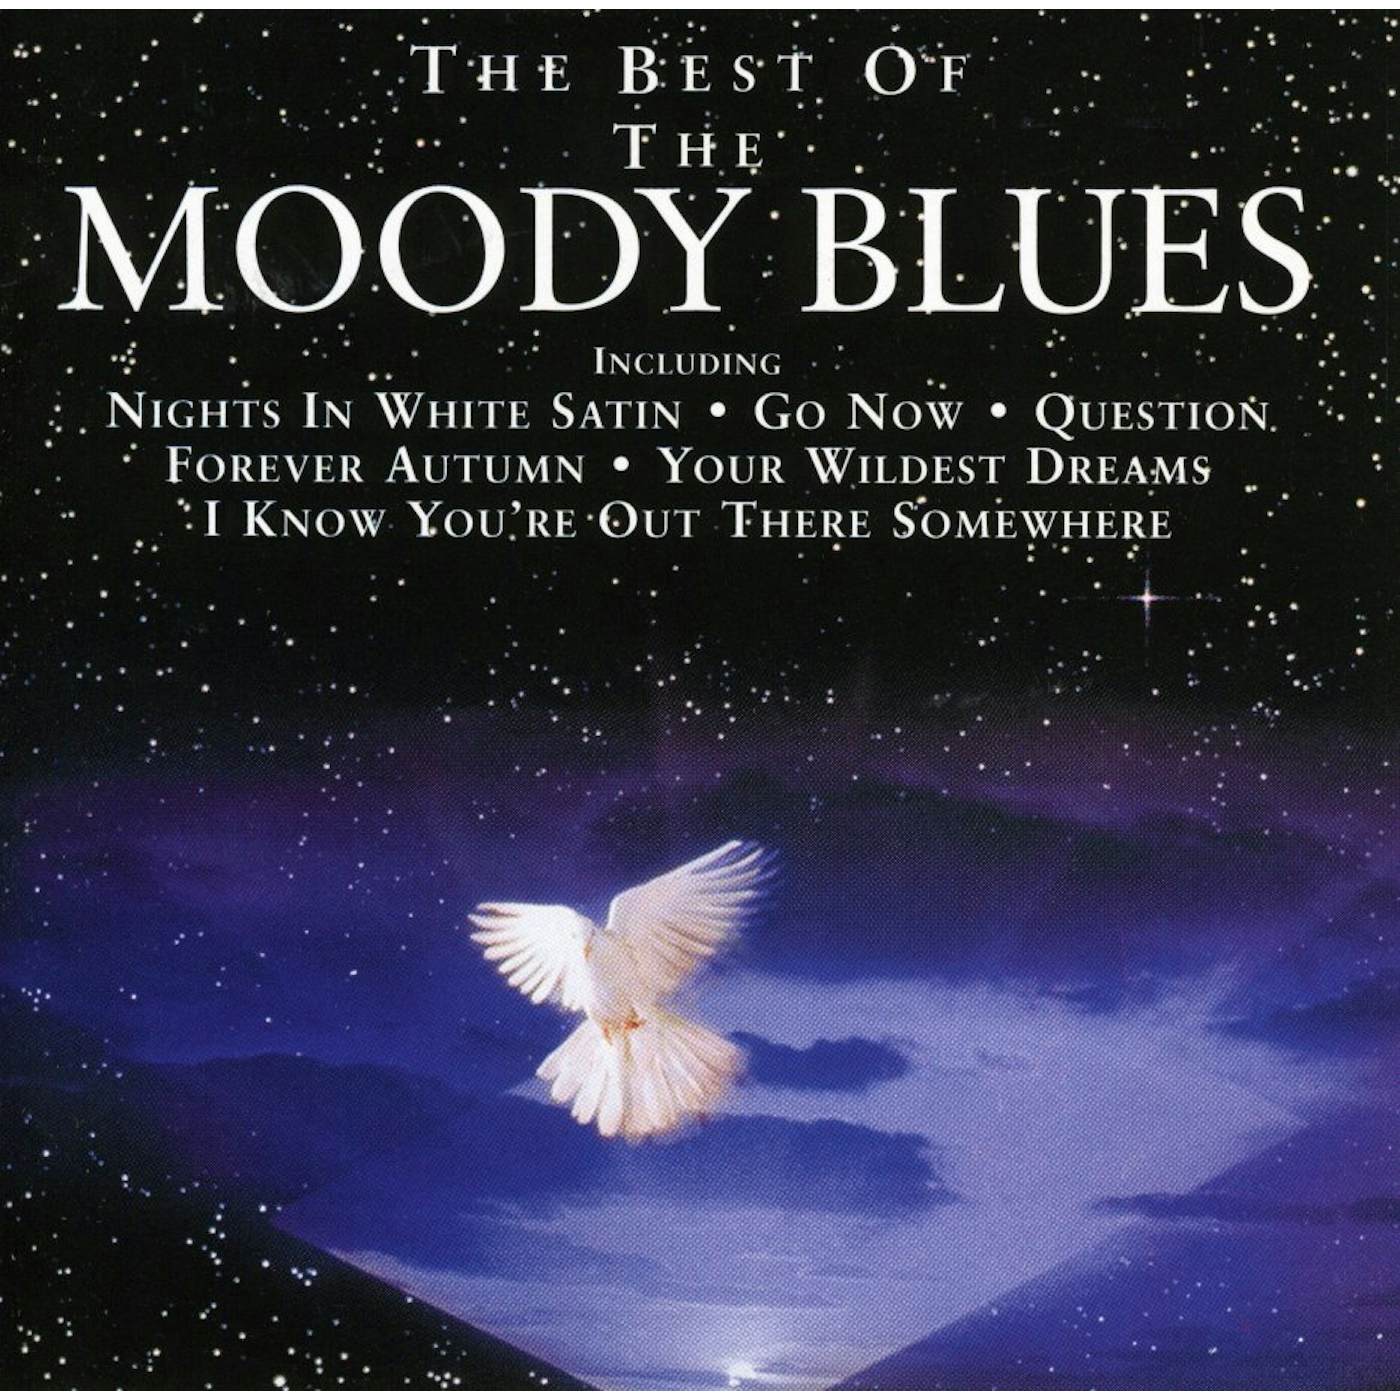 The Moody Blues BEST OF CD